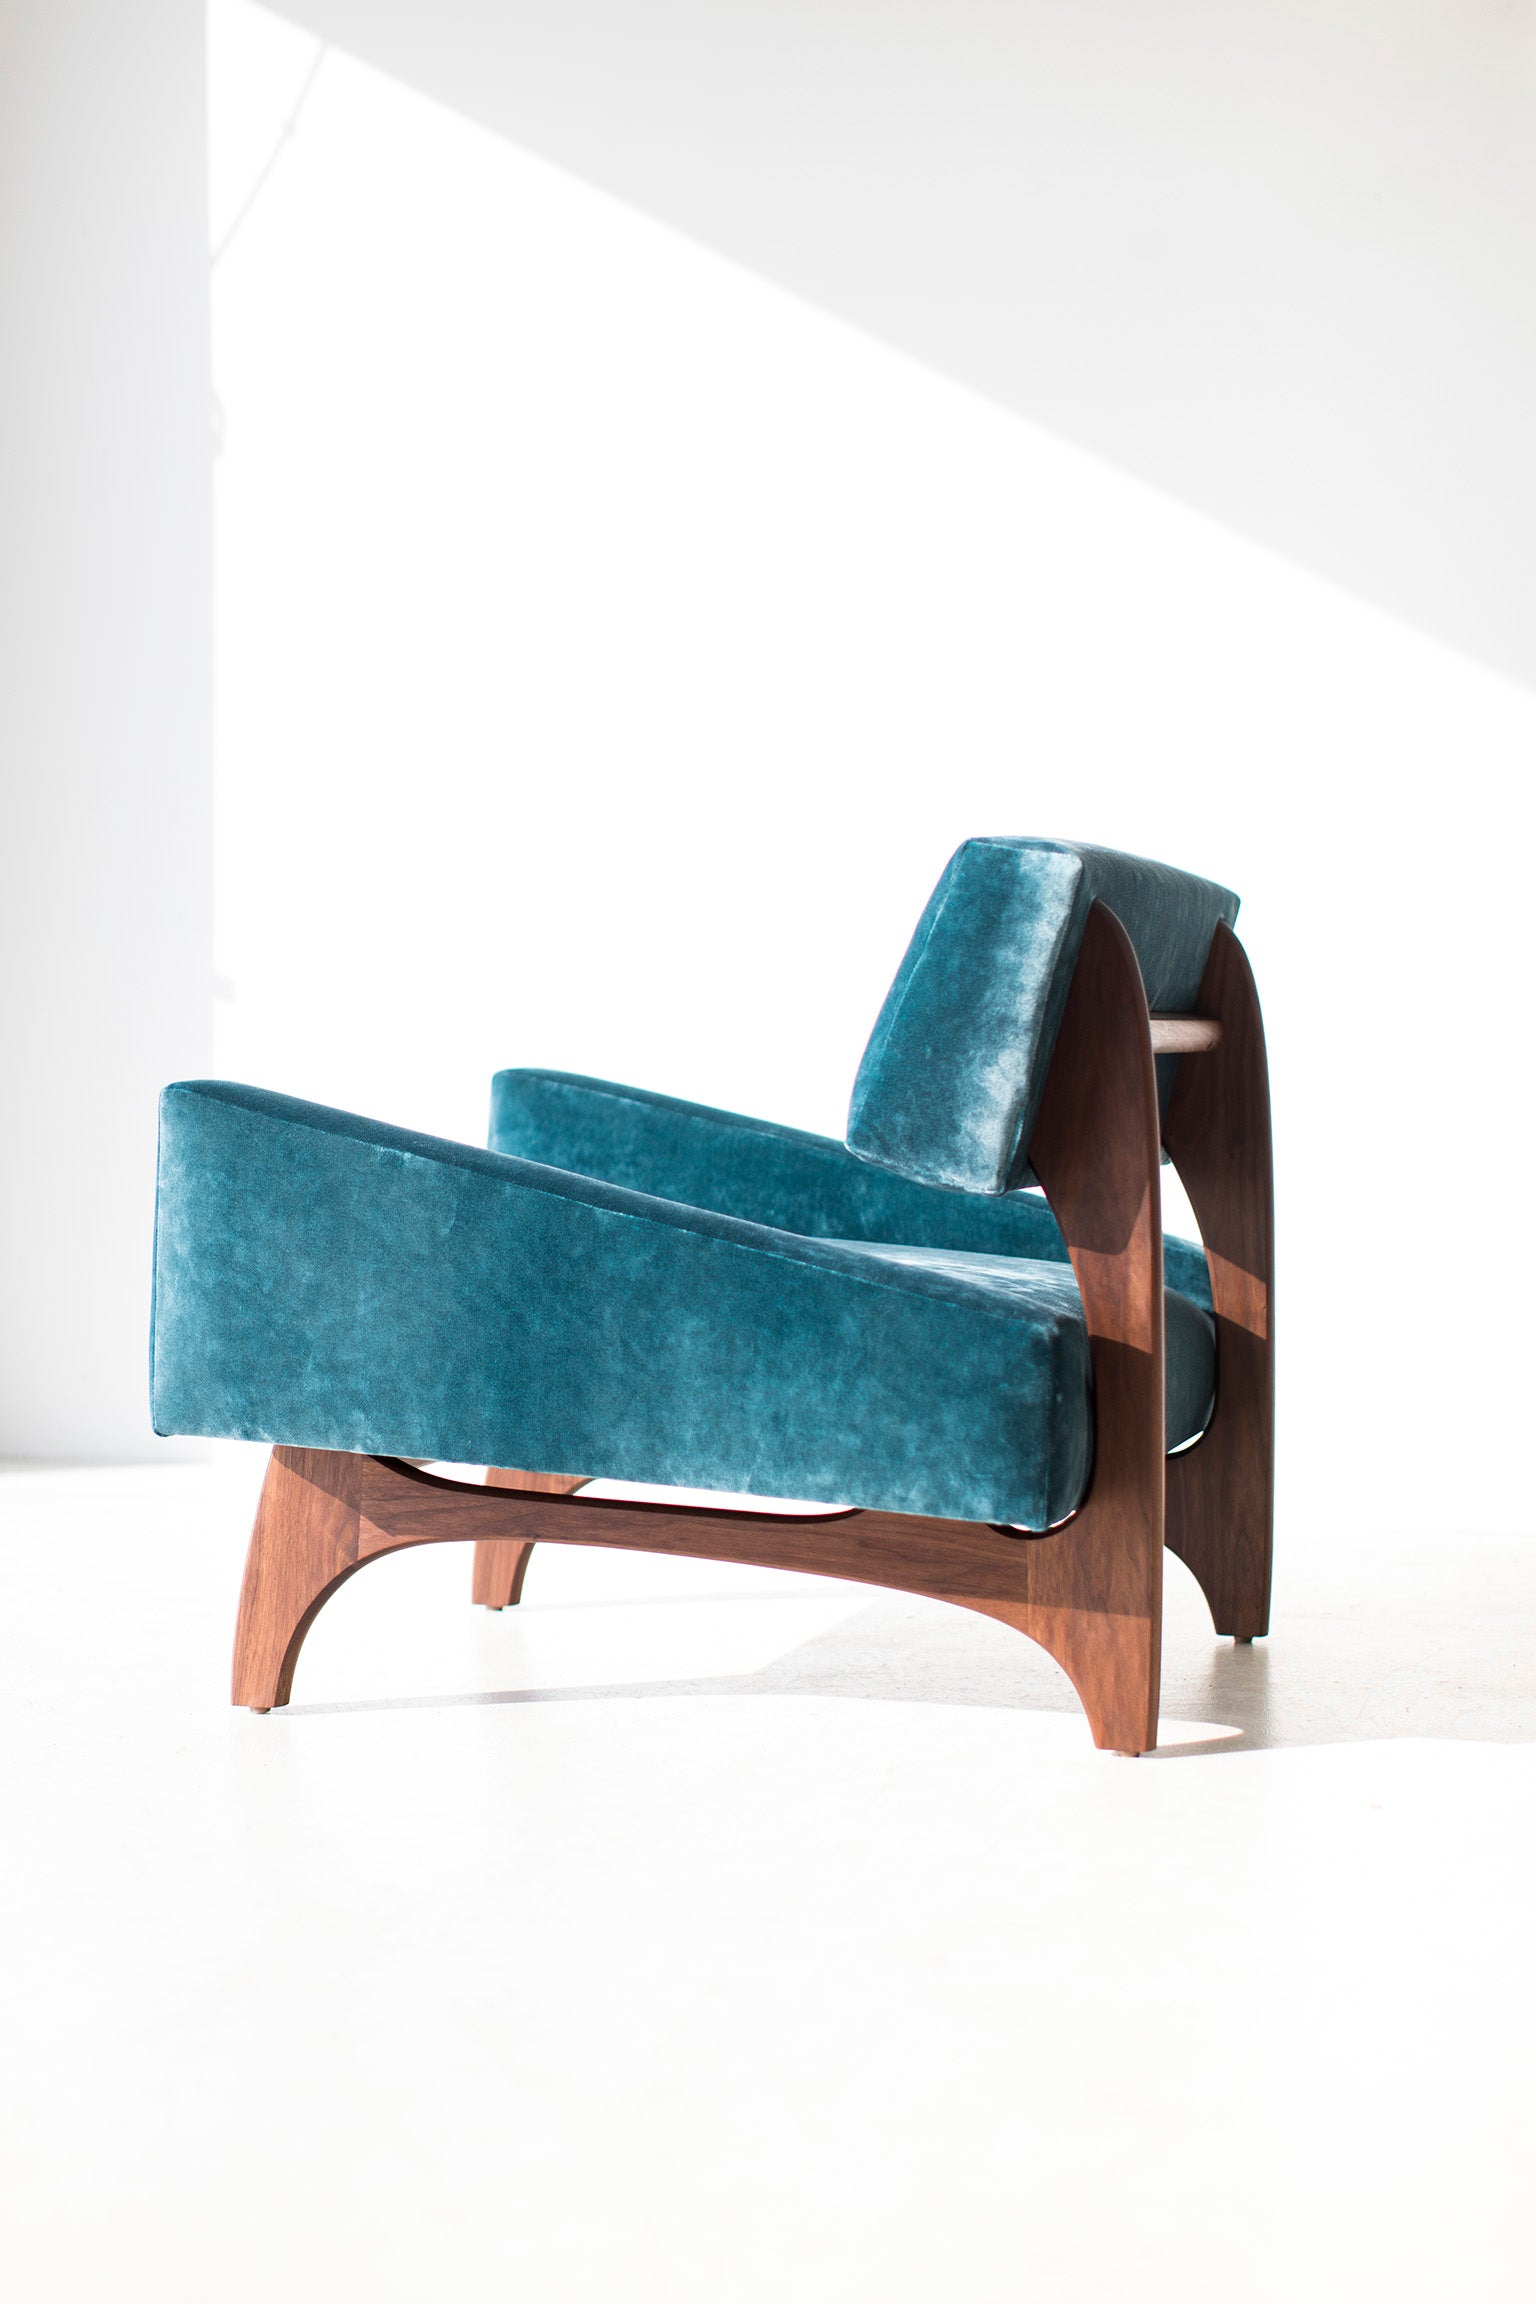      canadian-modern-lounge-chairs-1519-06